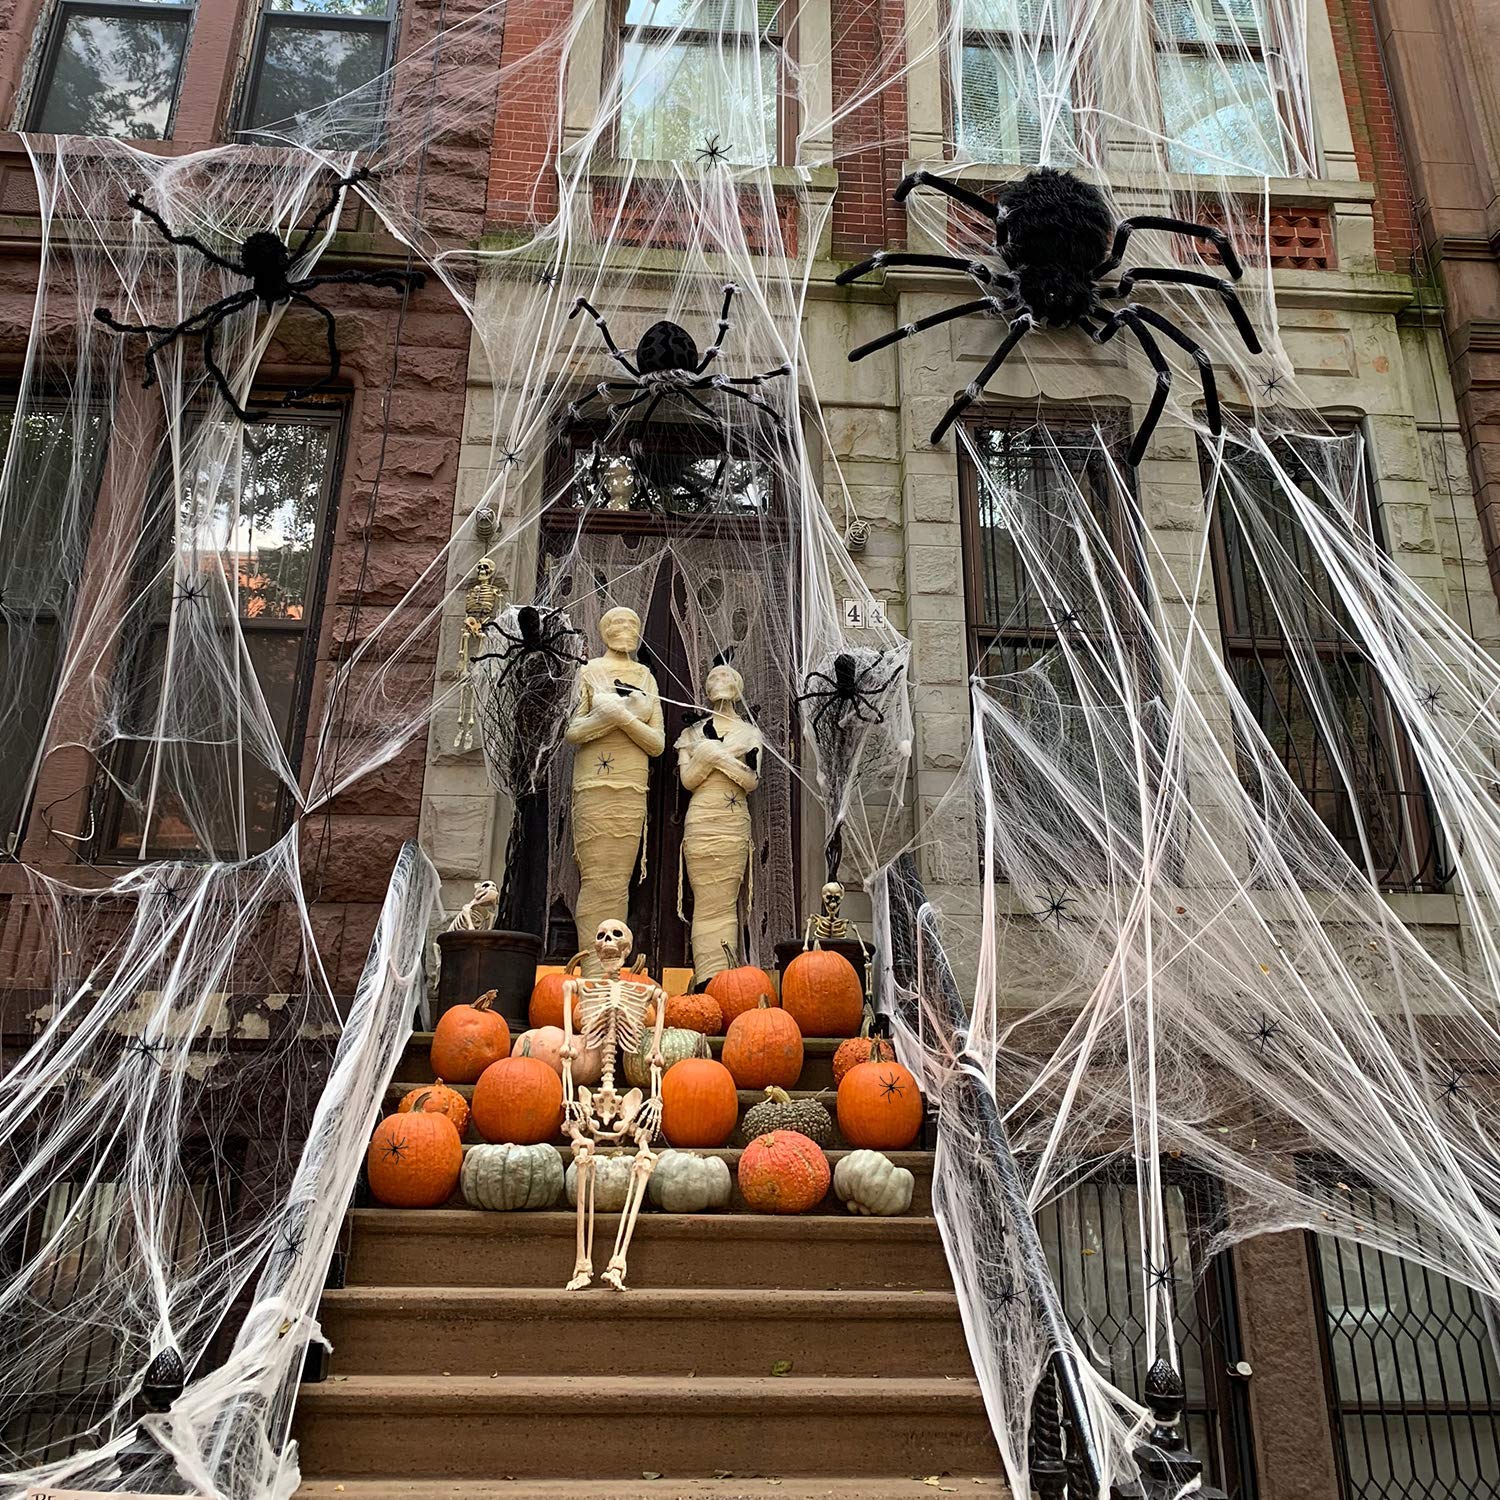 1400 sqft Halloween Spider Webs Decorations with 150 Extra Fake Spiders, Super Stretchy Cobwebs for Halloween decor Indoor and Outdoor